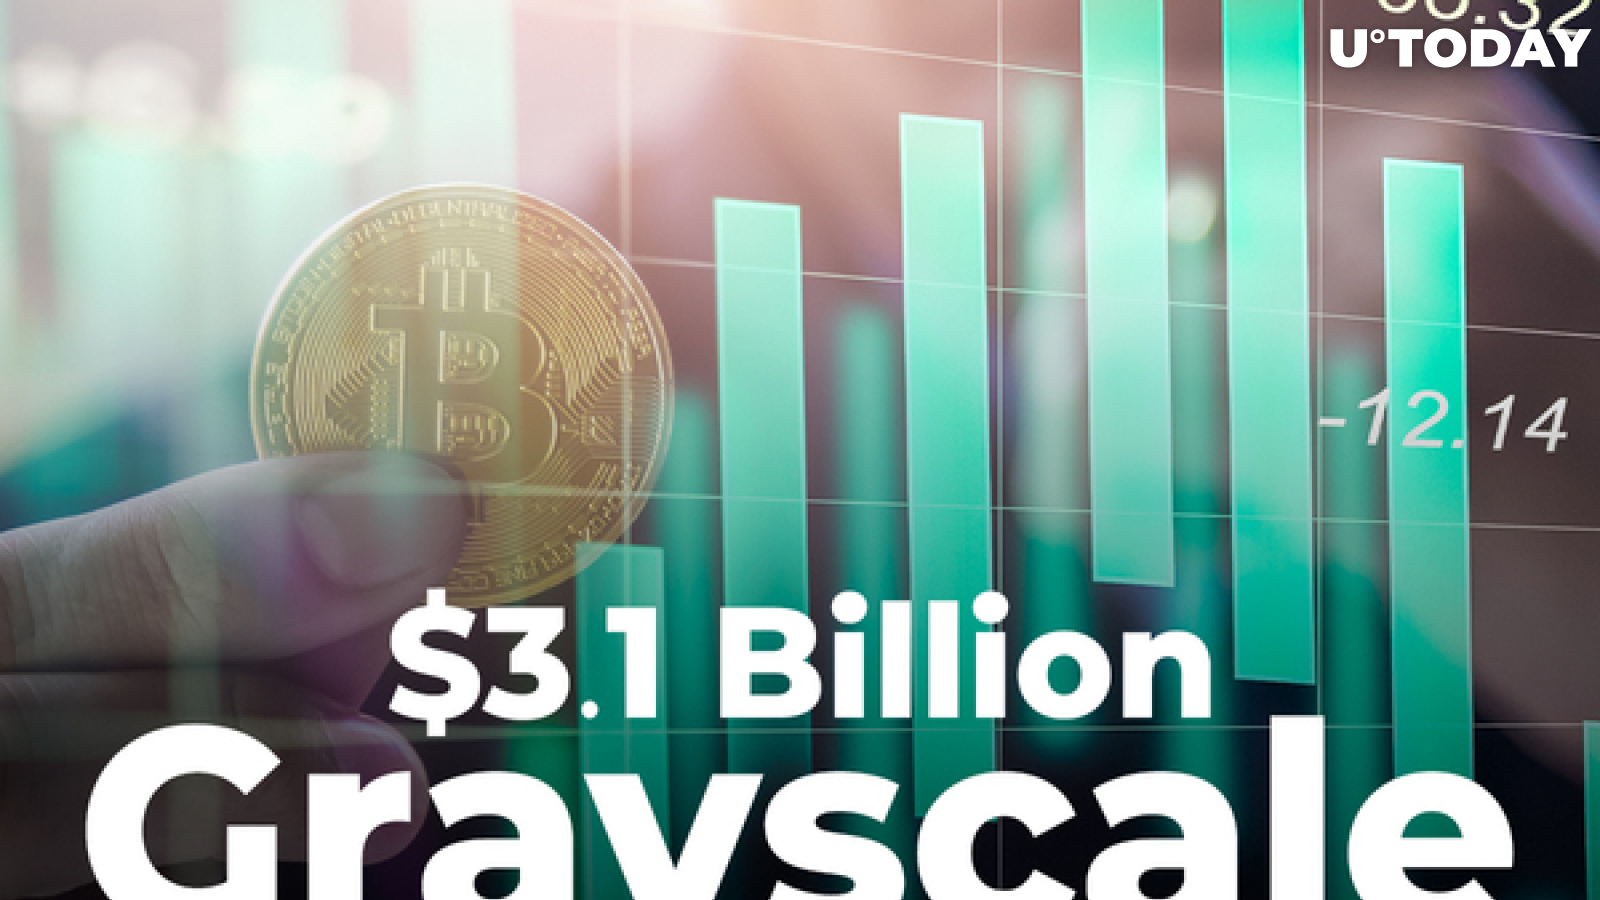 Grayscale Adds $3.1 Billion in Bitcoin and Altcoins Over Weekend